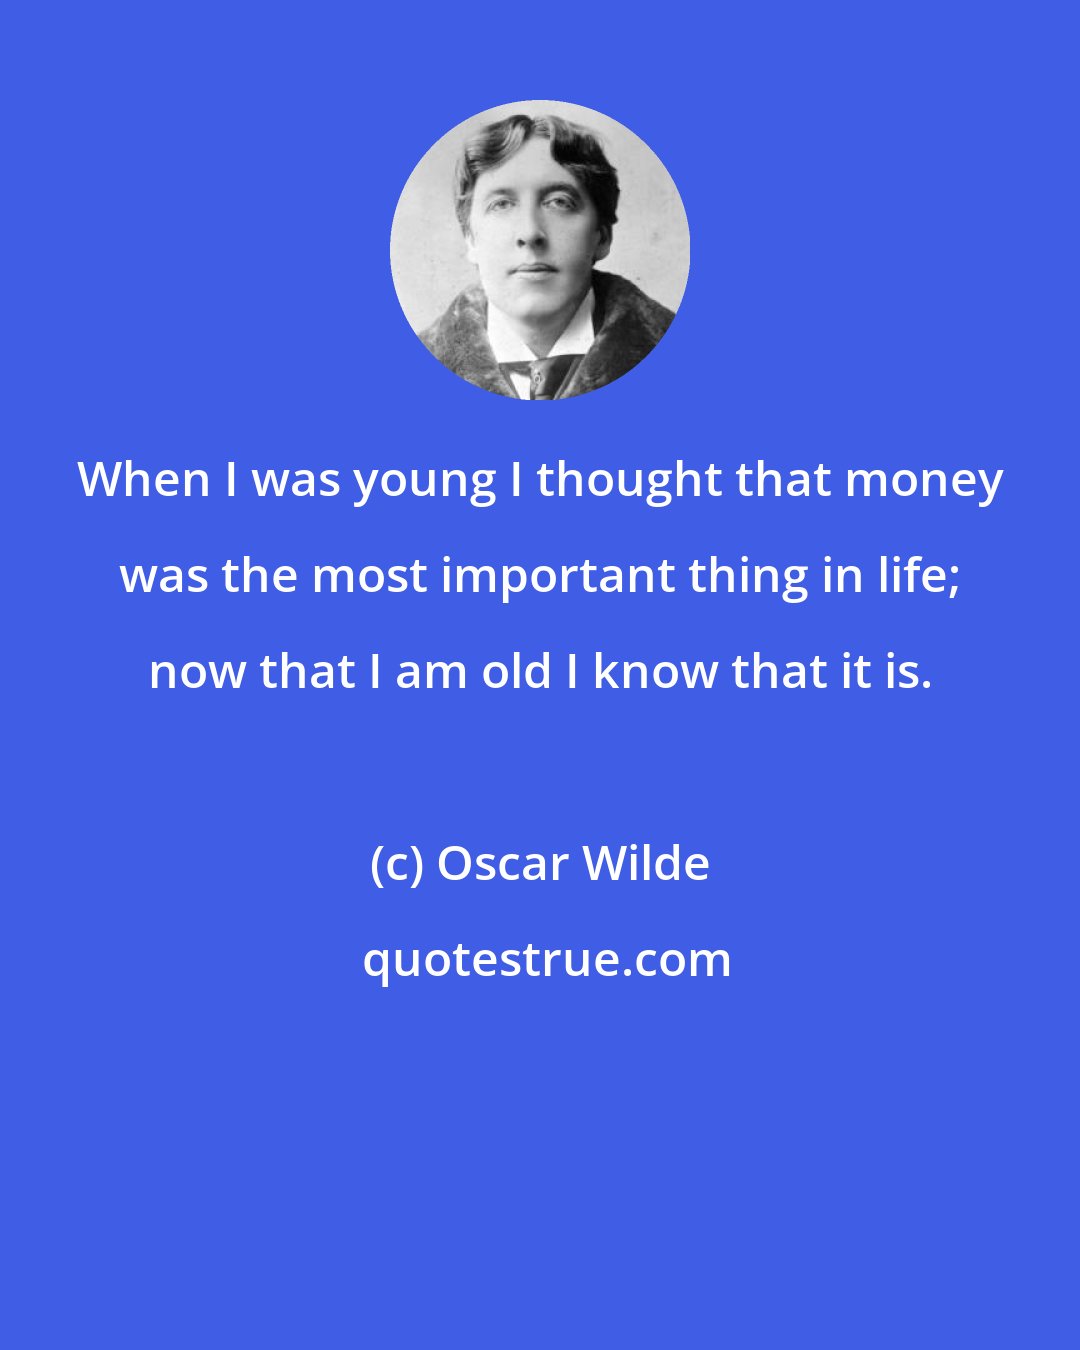 Oscar Wilde: When I was young I thought that money was the most important thing in life; now that I am old I know that it is.